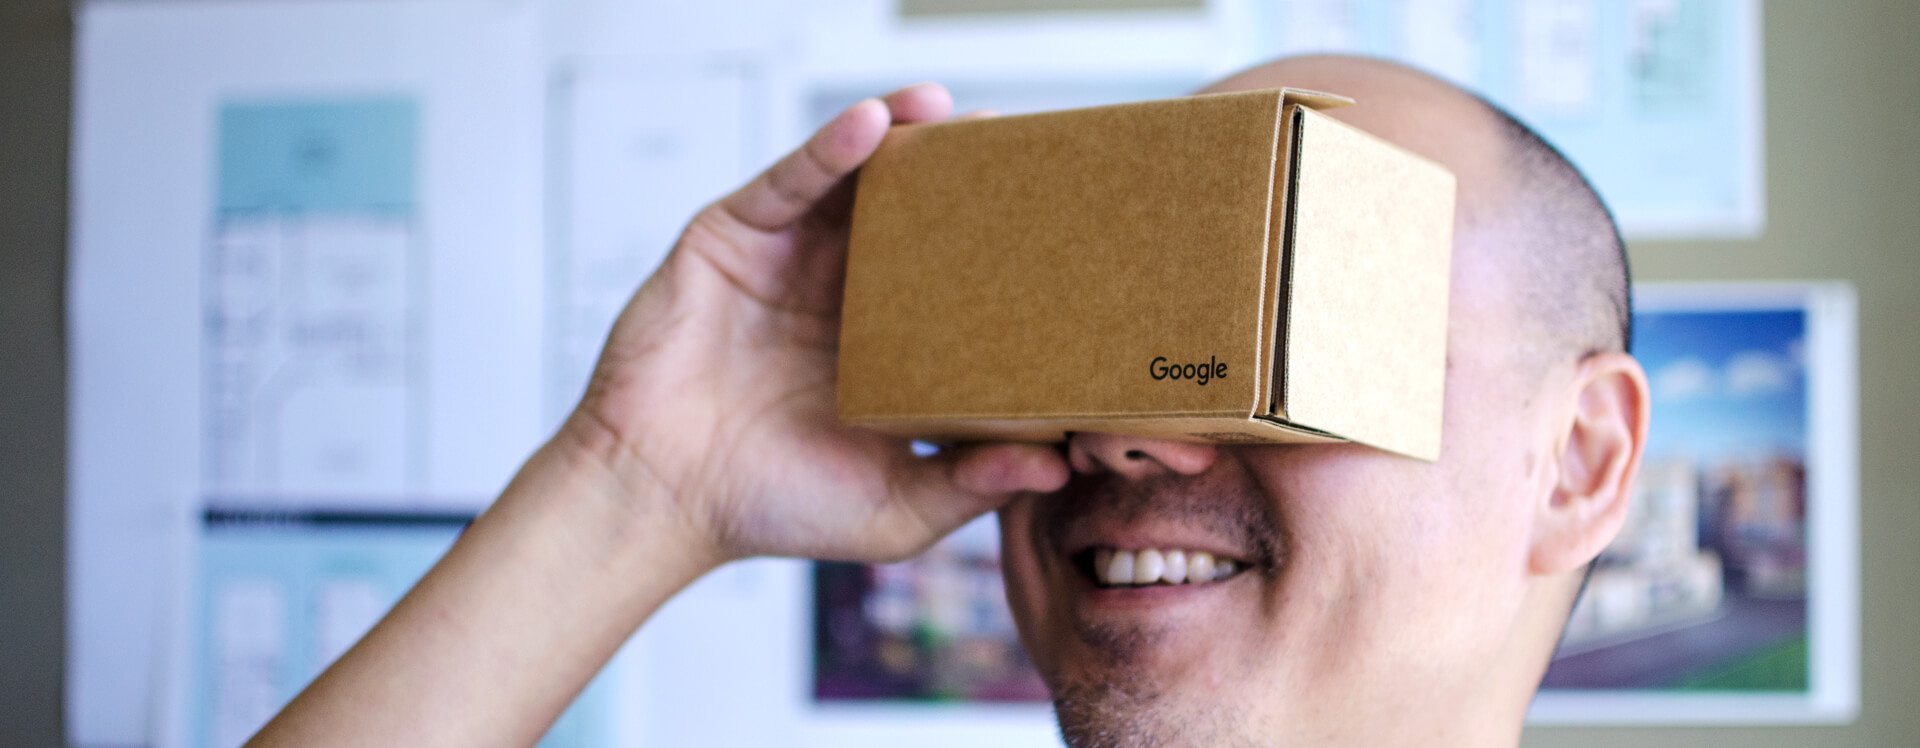 Man holding a box with the google logo to mock VR headsets